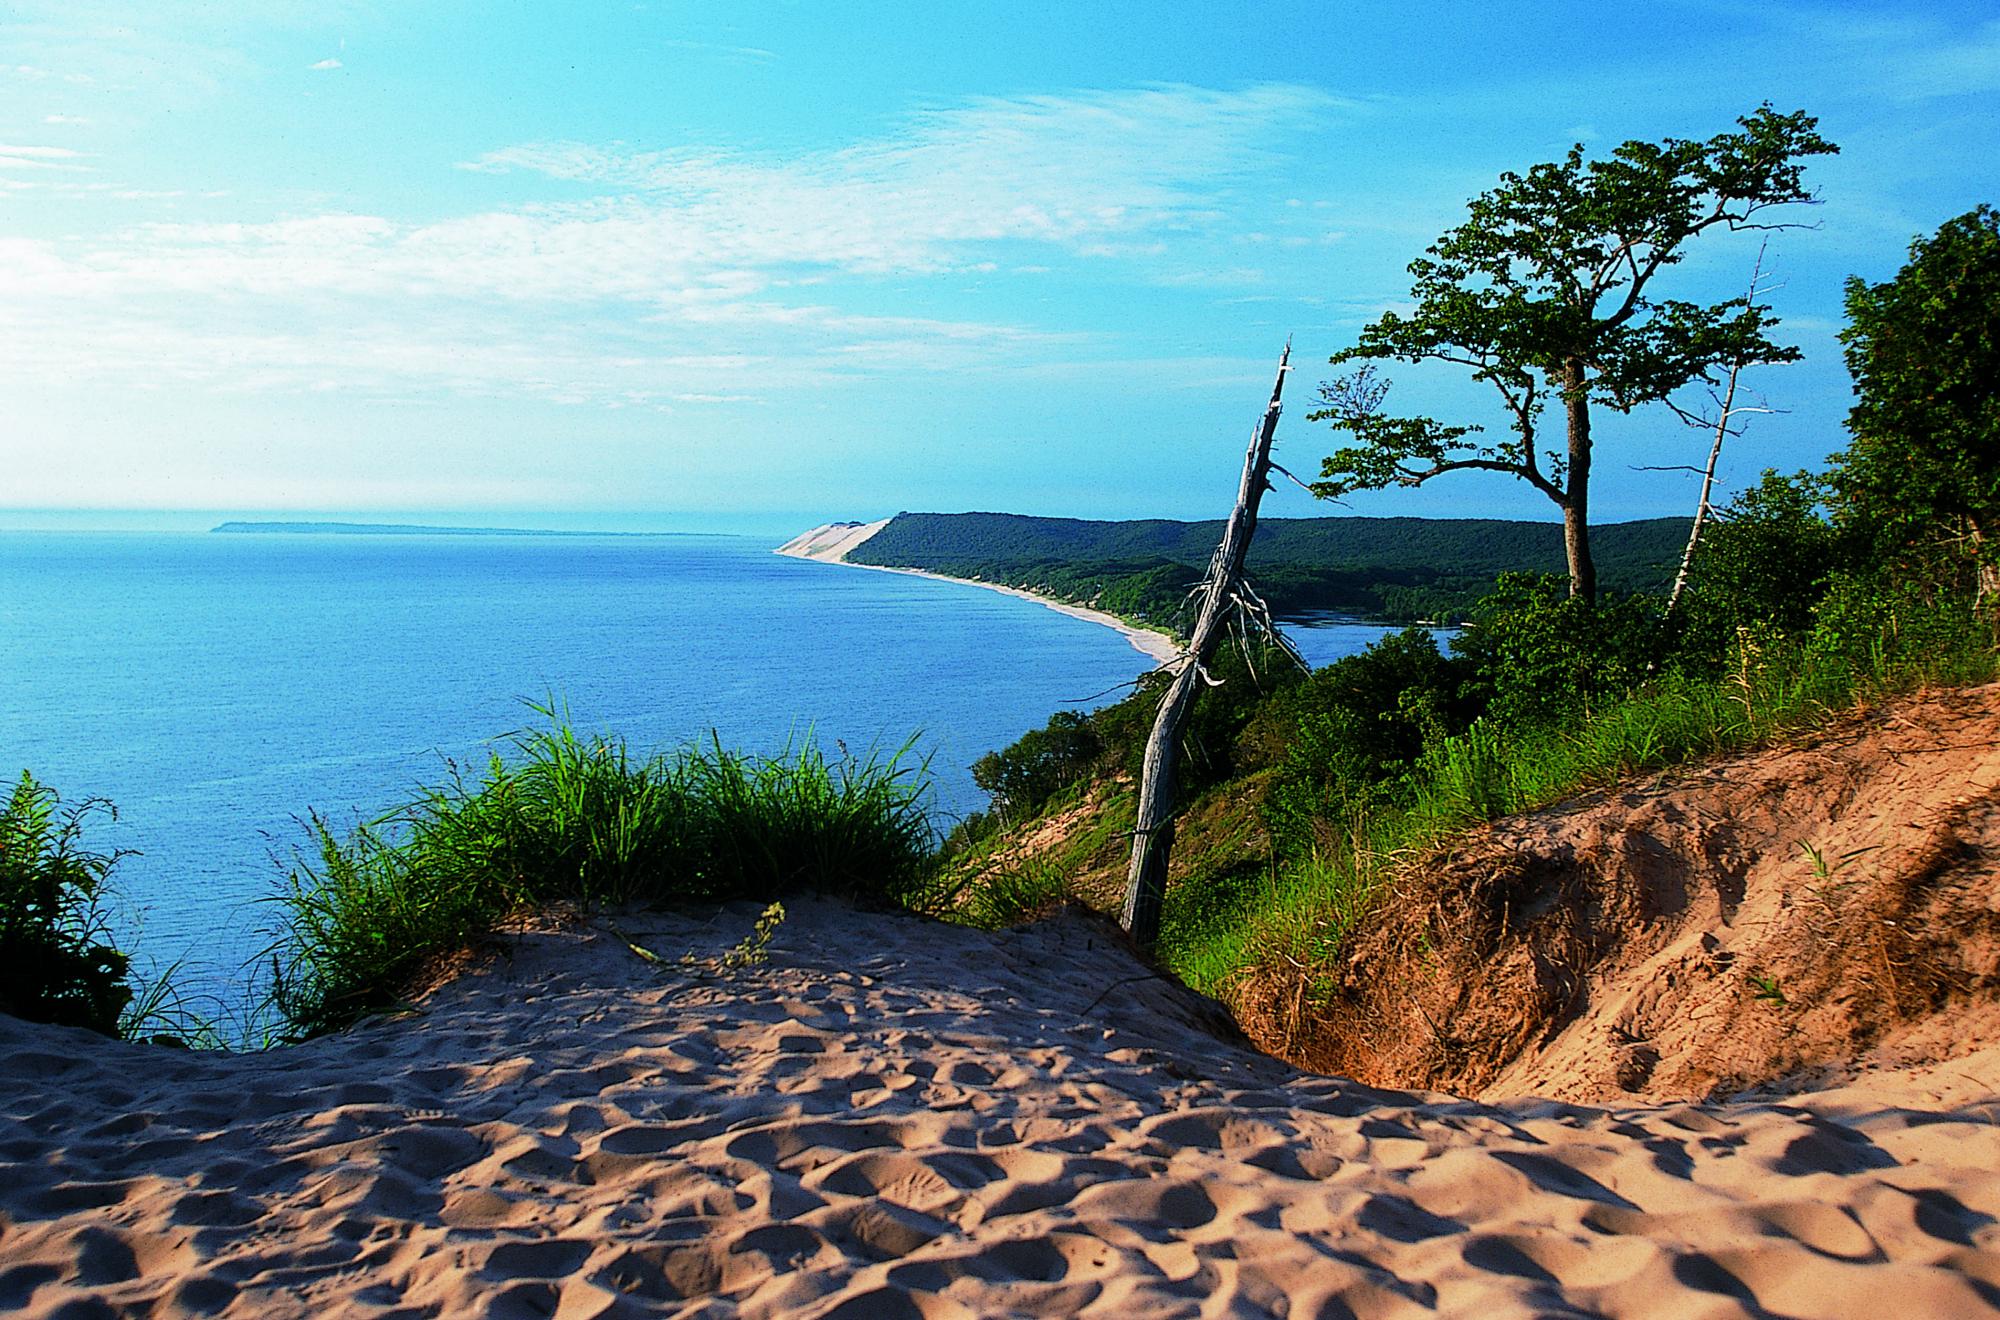 Empire Bluff in Sleeping Bear Dunes National Lakeshore, site of BWB 2015's field trip | Photo courtesy of Traverse City Tourism